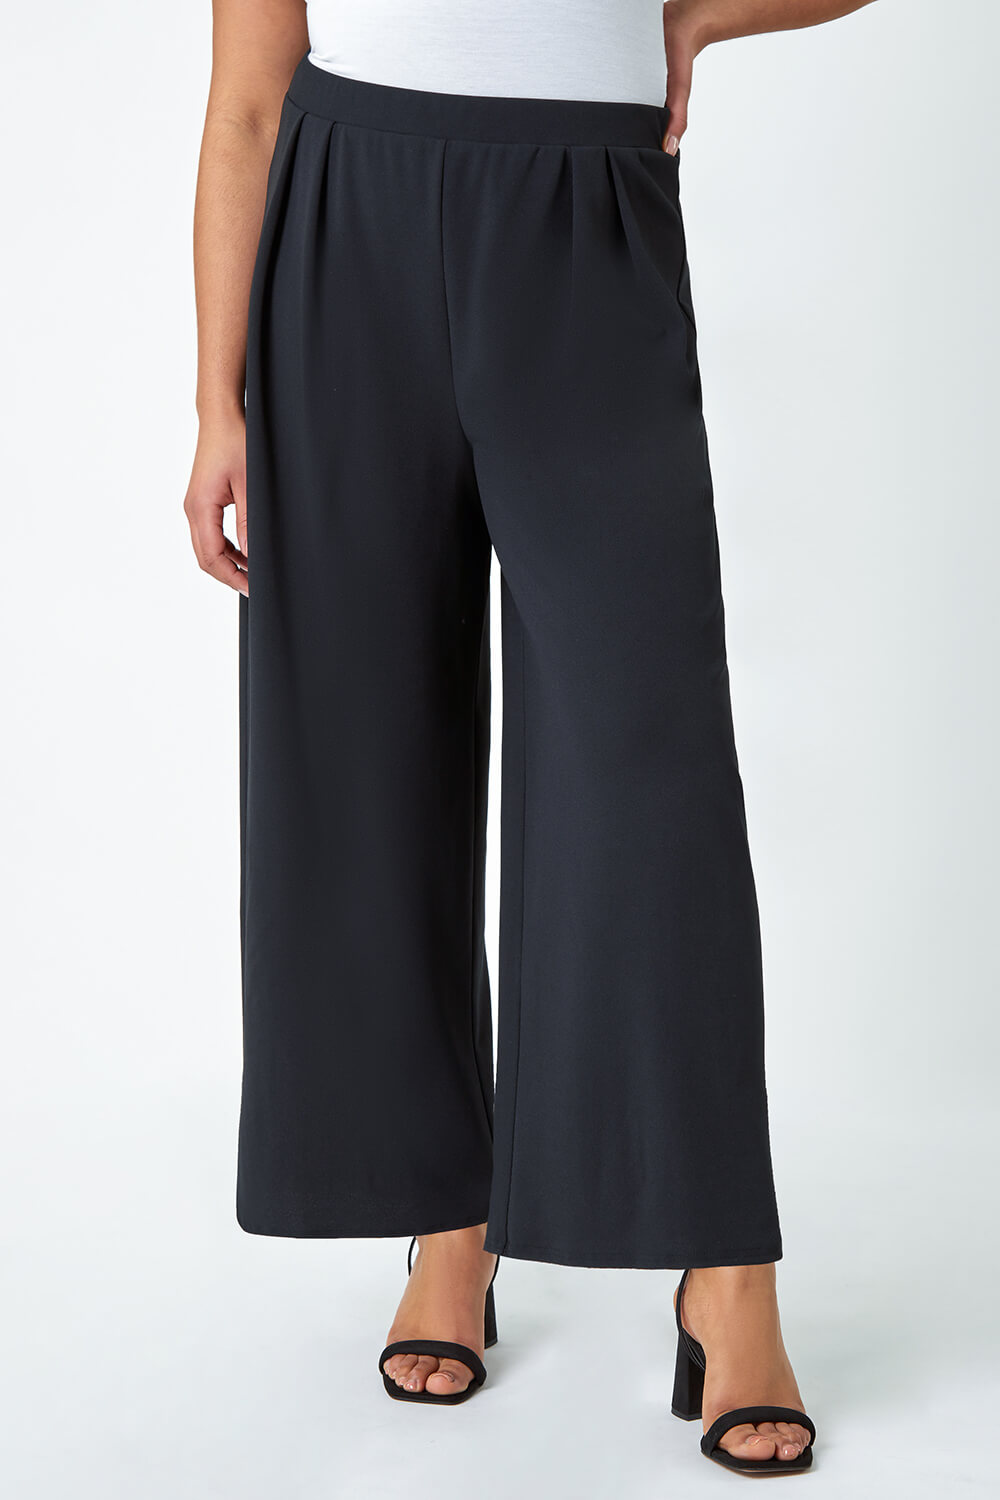 Black Curve Wide Leg Pleat Stretch Trousers, Image 4 of 5